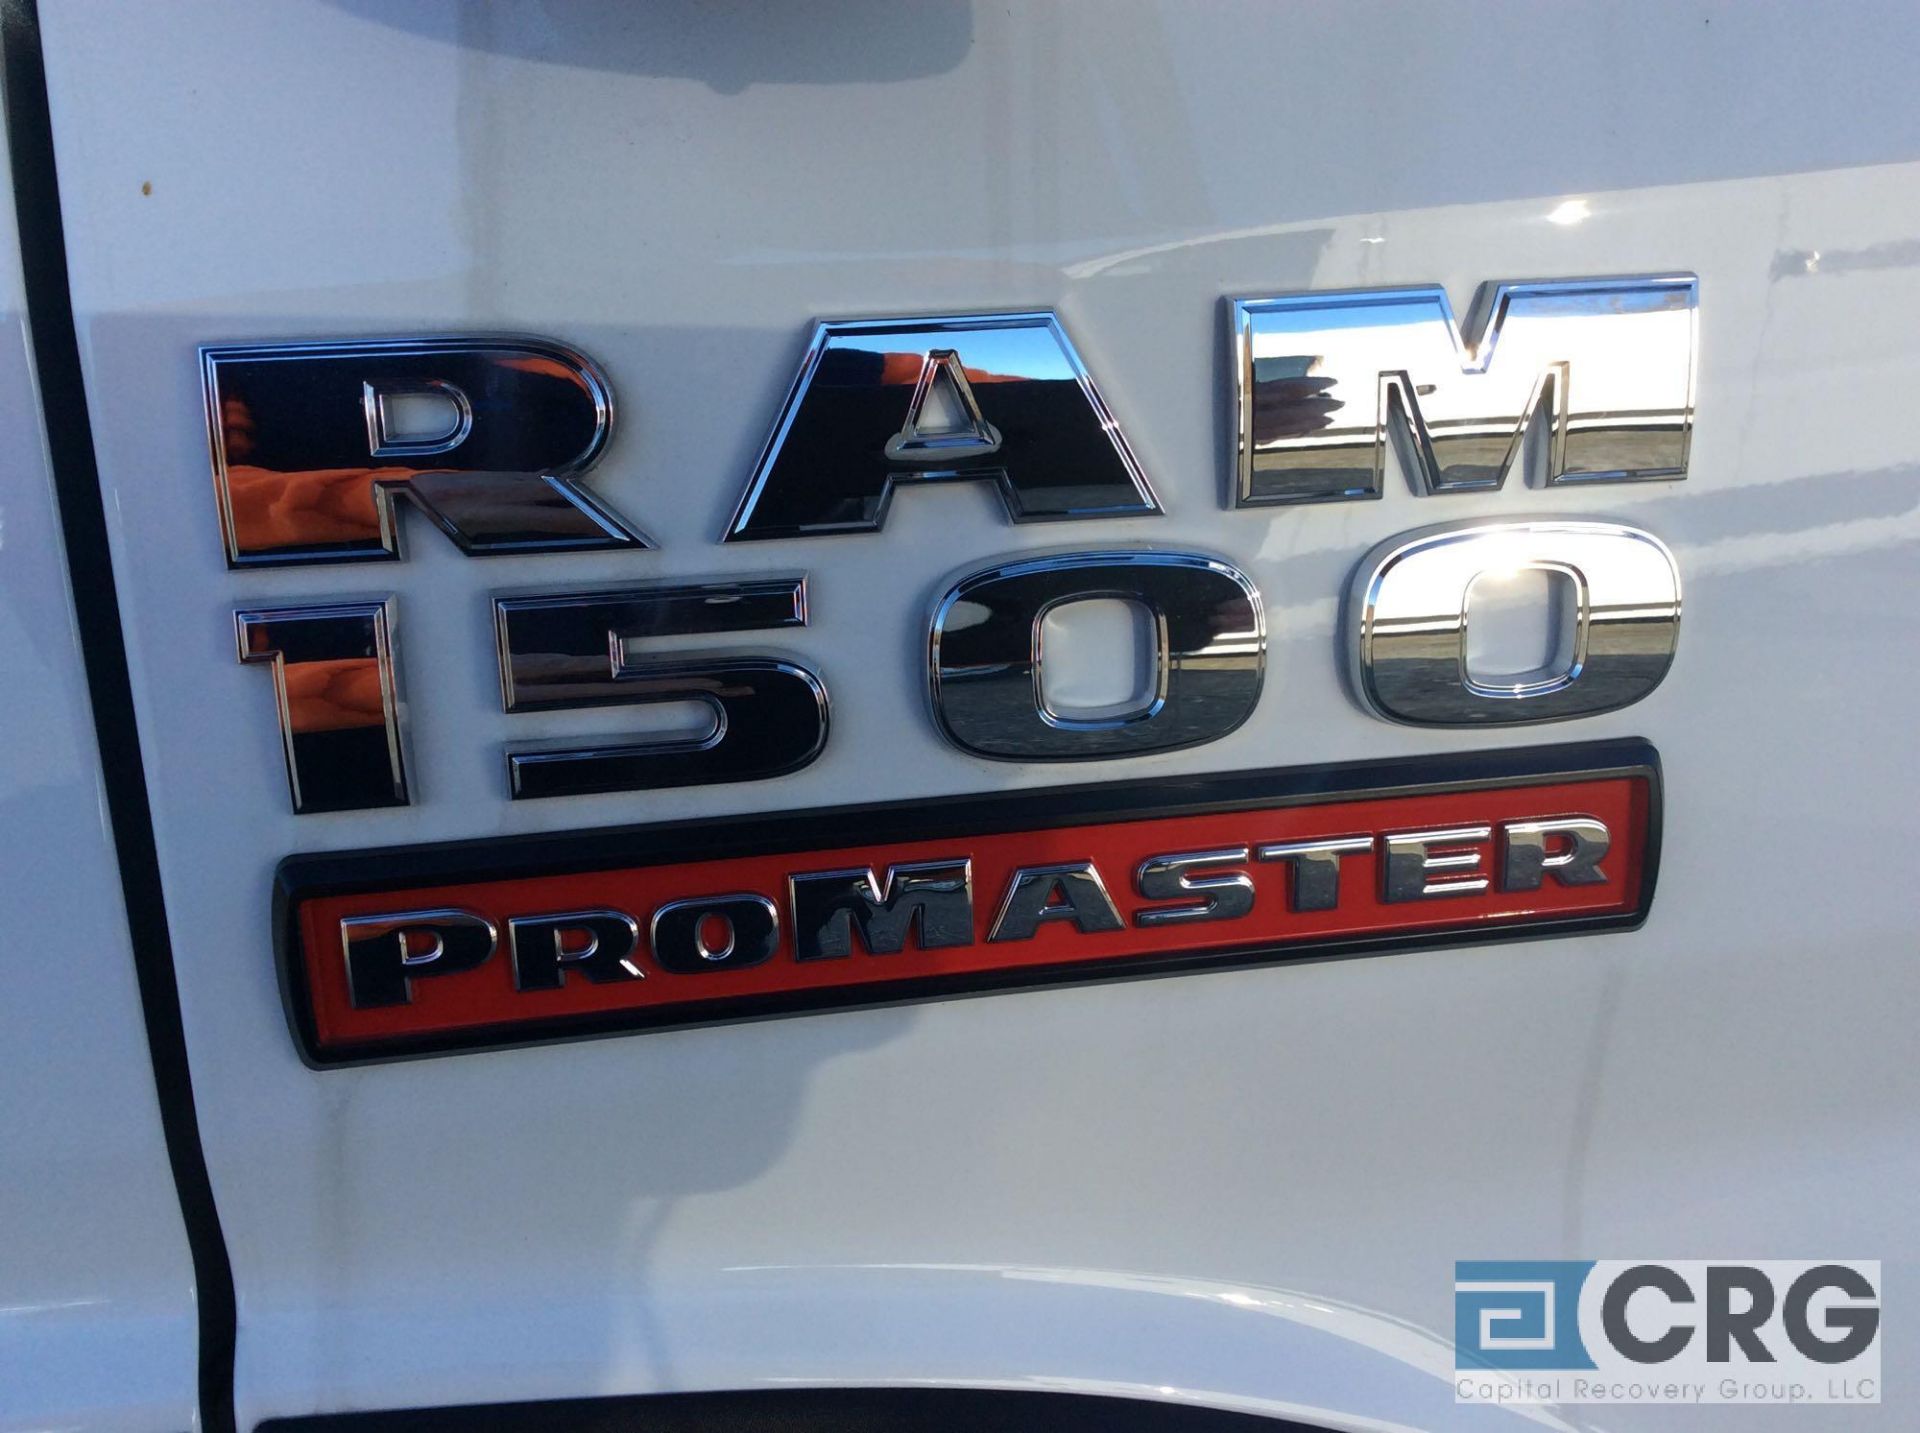 2019 Ram 1500 PROMASTER CARGO VAN 136” WB LOW ROOF, AT, 3.6 liter V-6 engine, keyless entry, power - Image 7 of 13